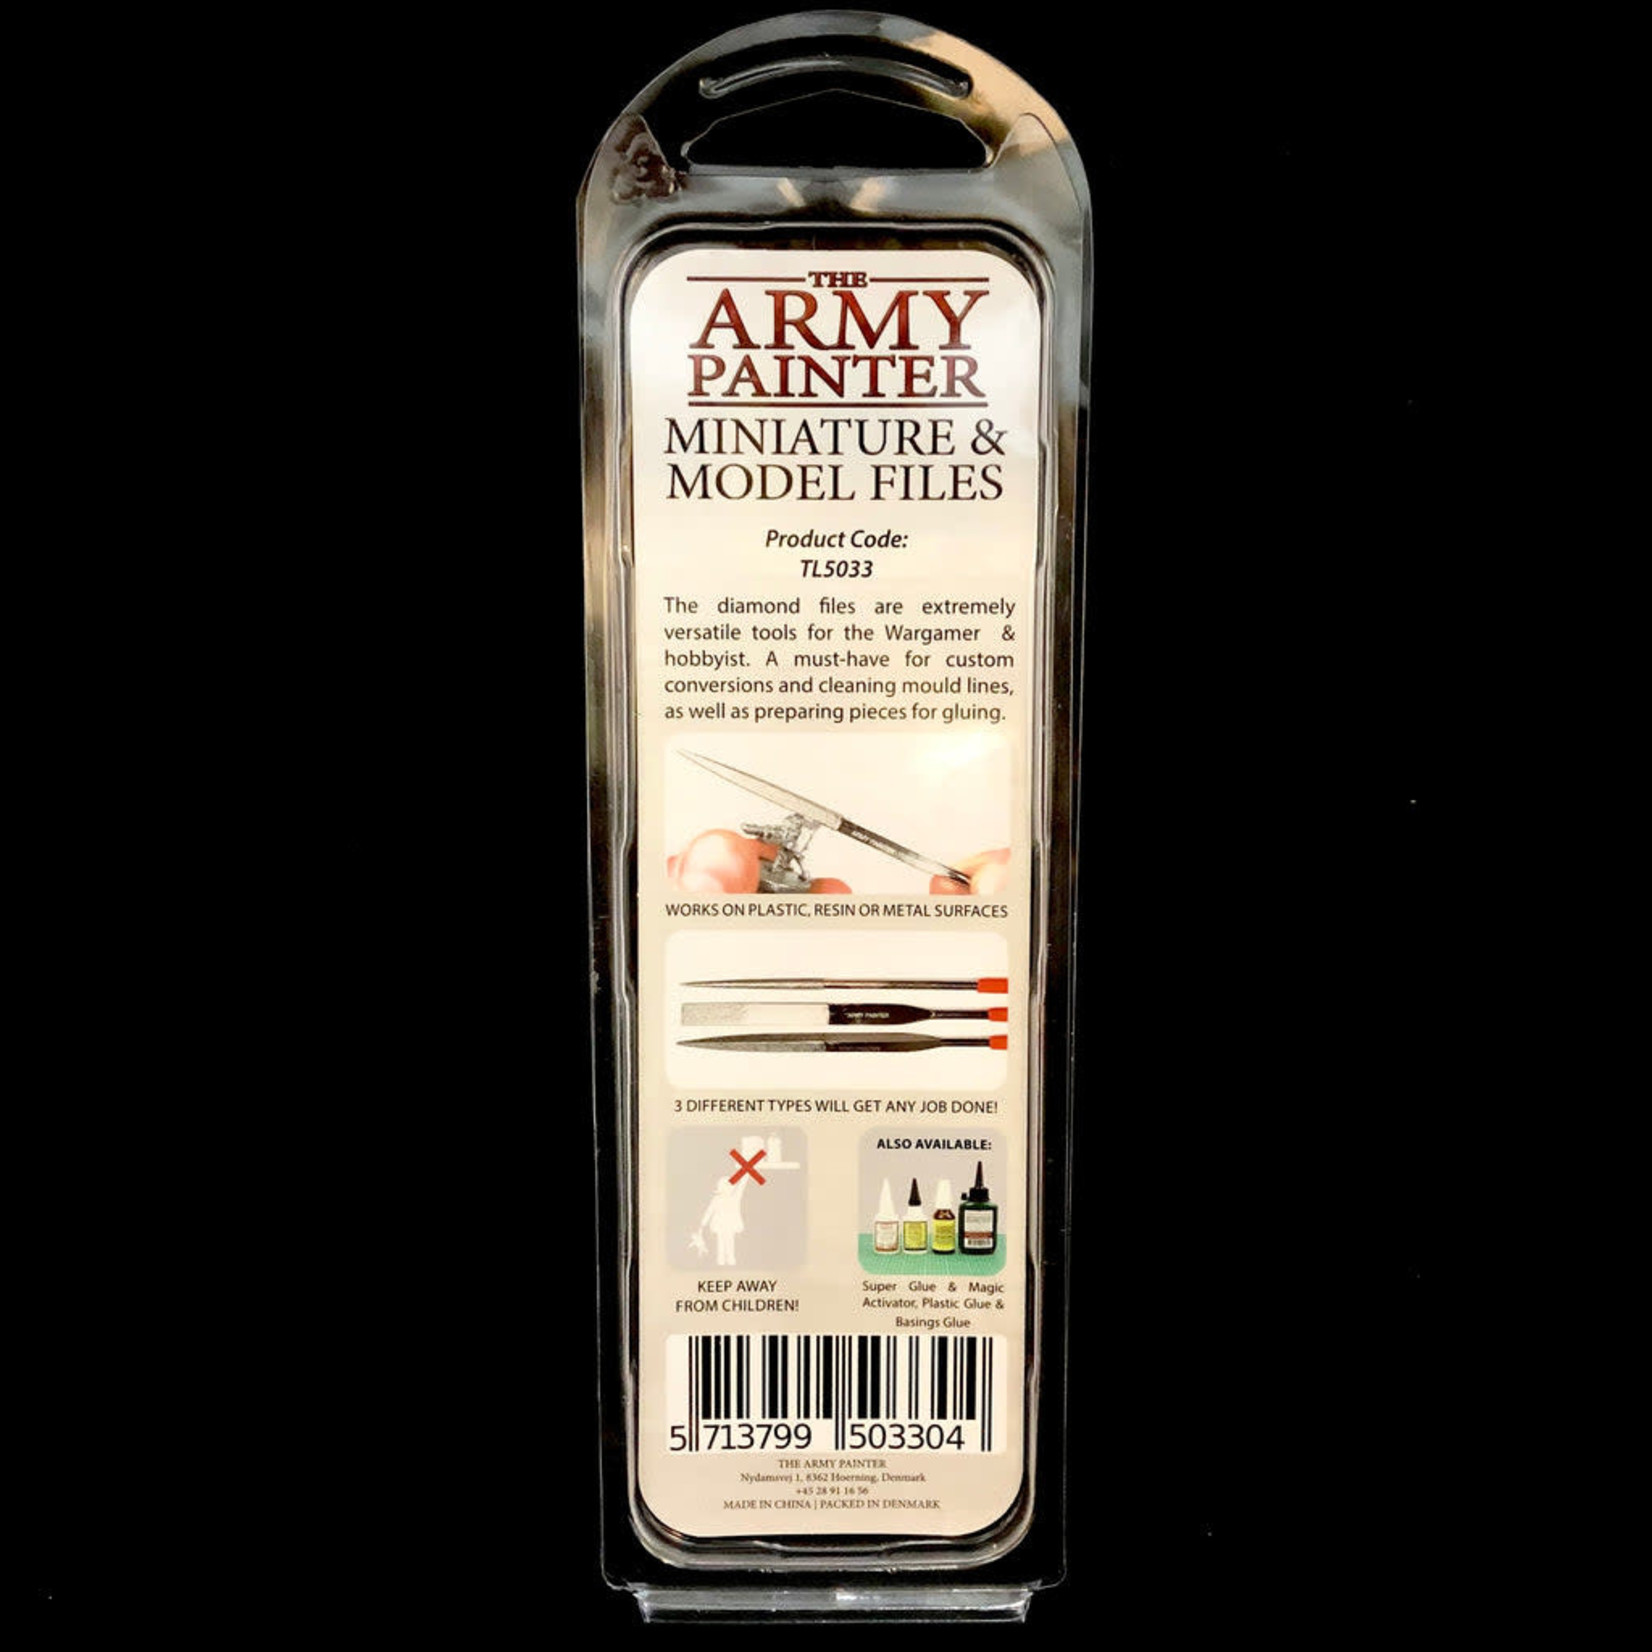 The Army Painter The Army Painter Miniature and Model Files